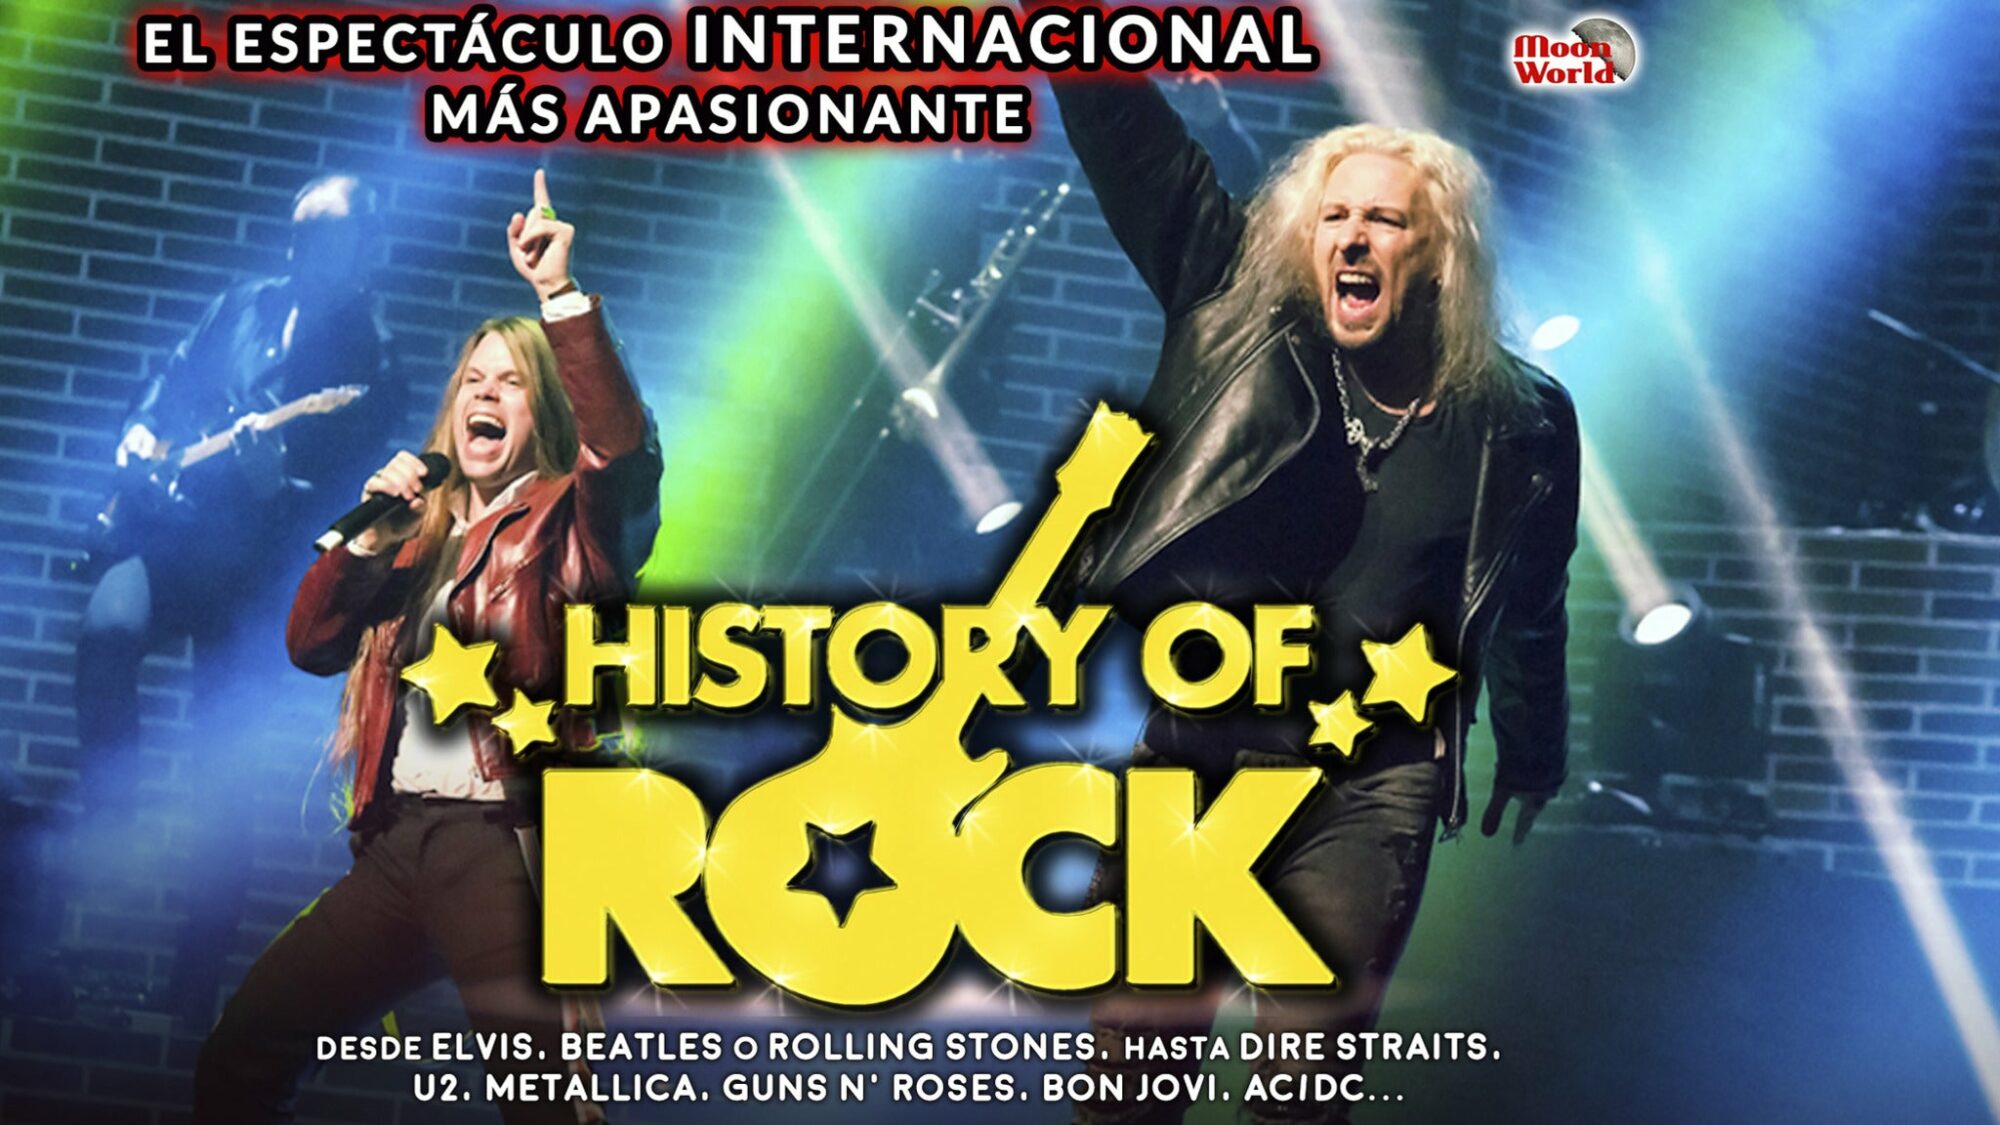 Image name The History of Rock at Whitby Pavilion Theatre Whitby the 5 image from the post The History of Rock at Whitby Pavilion Theatre, Whitby in Yorkshire.com.